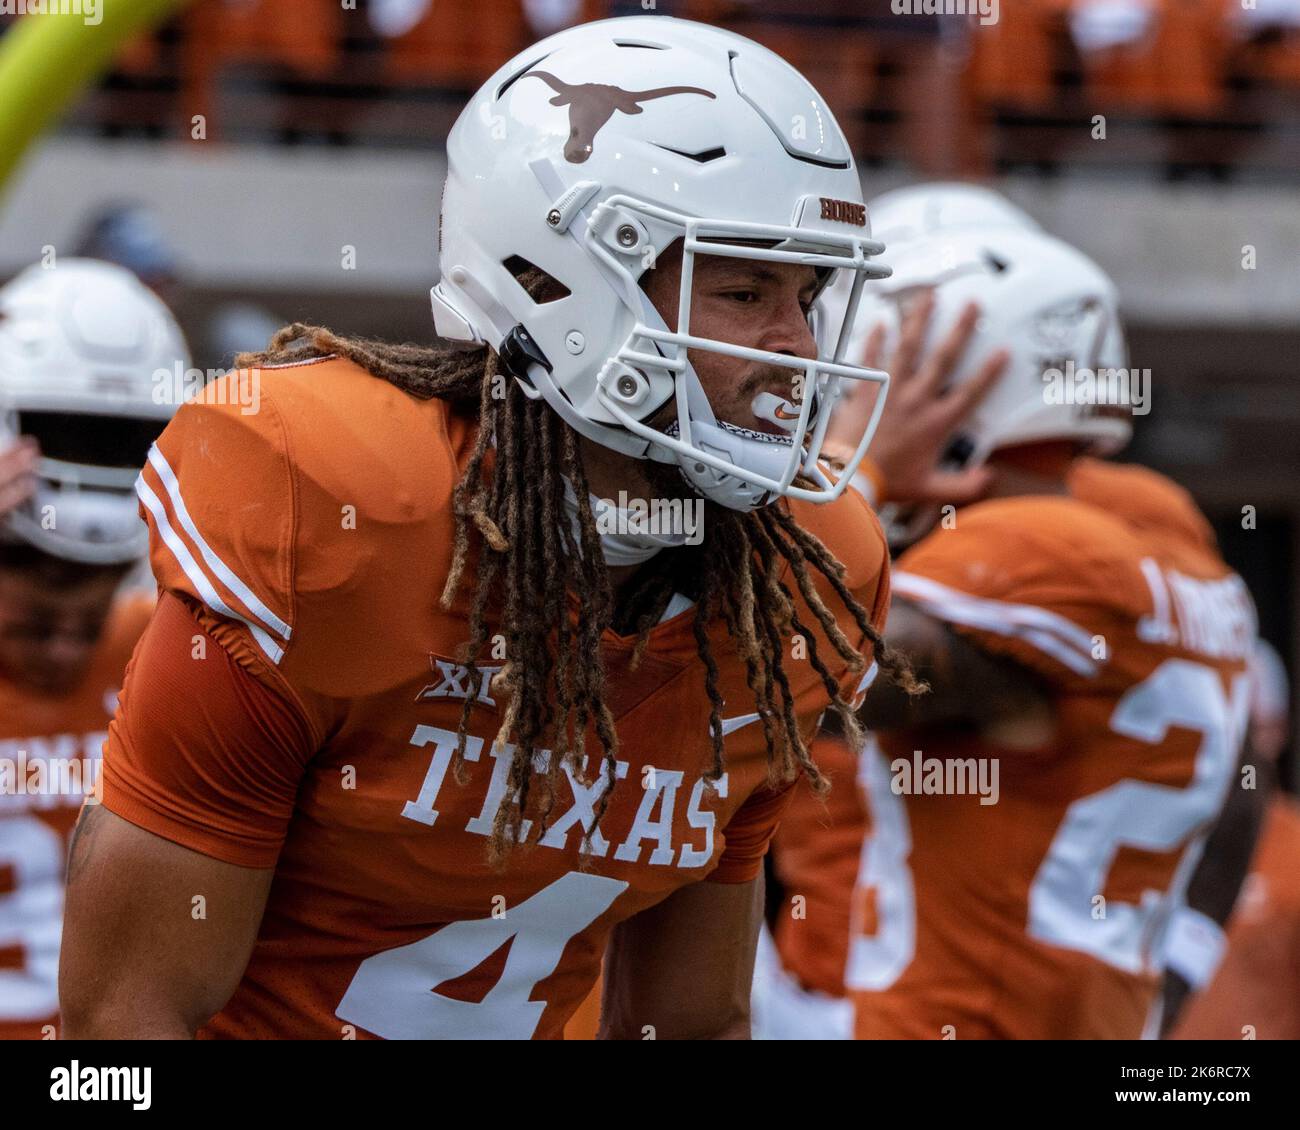 October 15, 2022. WR-H Jordan Whittington # 4 of the Texas Longhorns warming up before the game vs the Iowa State Cyclones at DKR-Memorial Stadium. Credit: Cal Sport Media/Alamy Live News Stock Photo